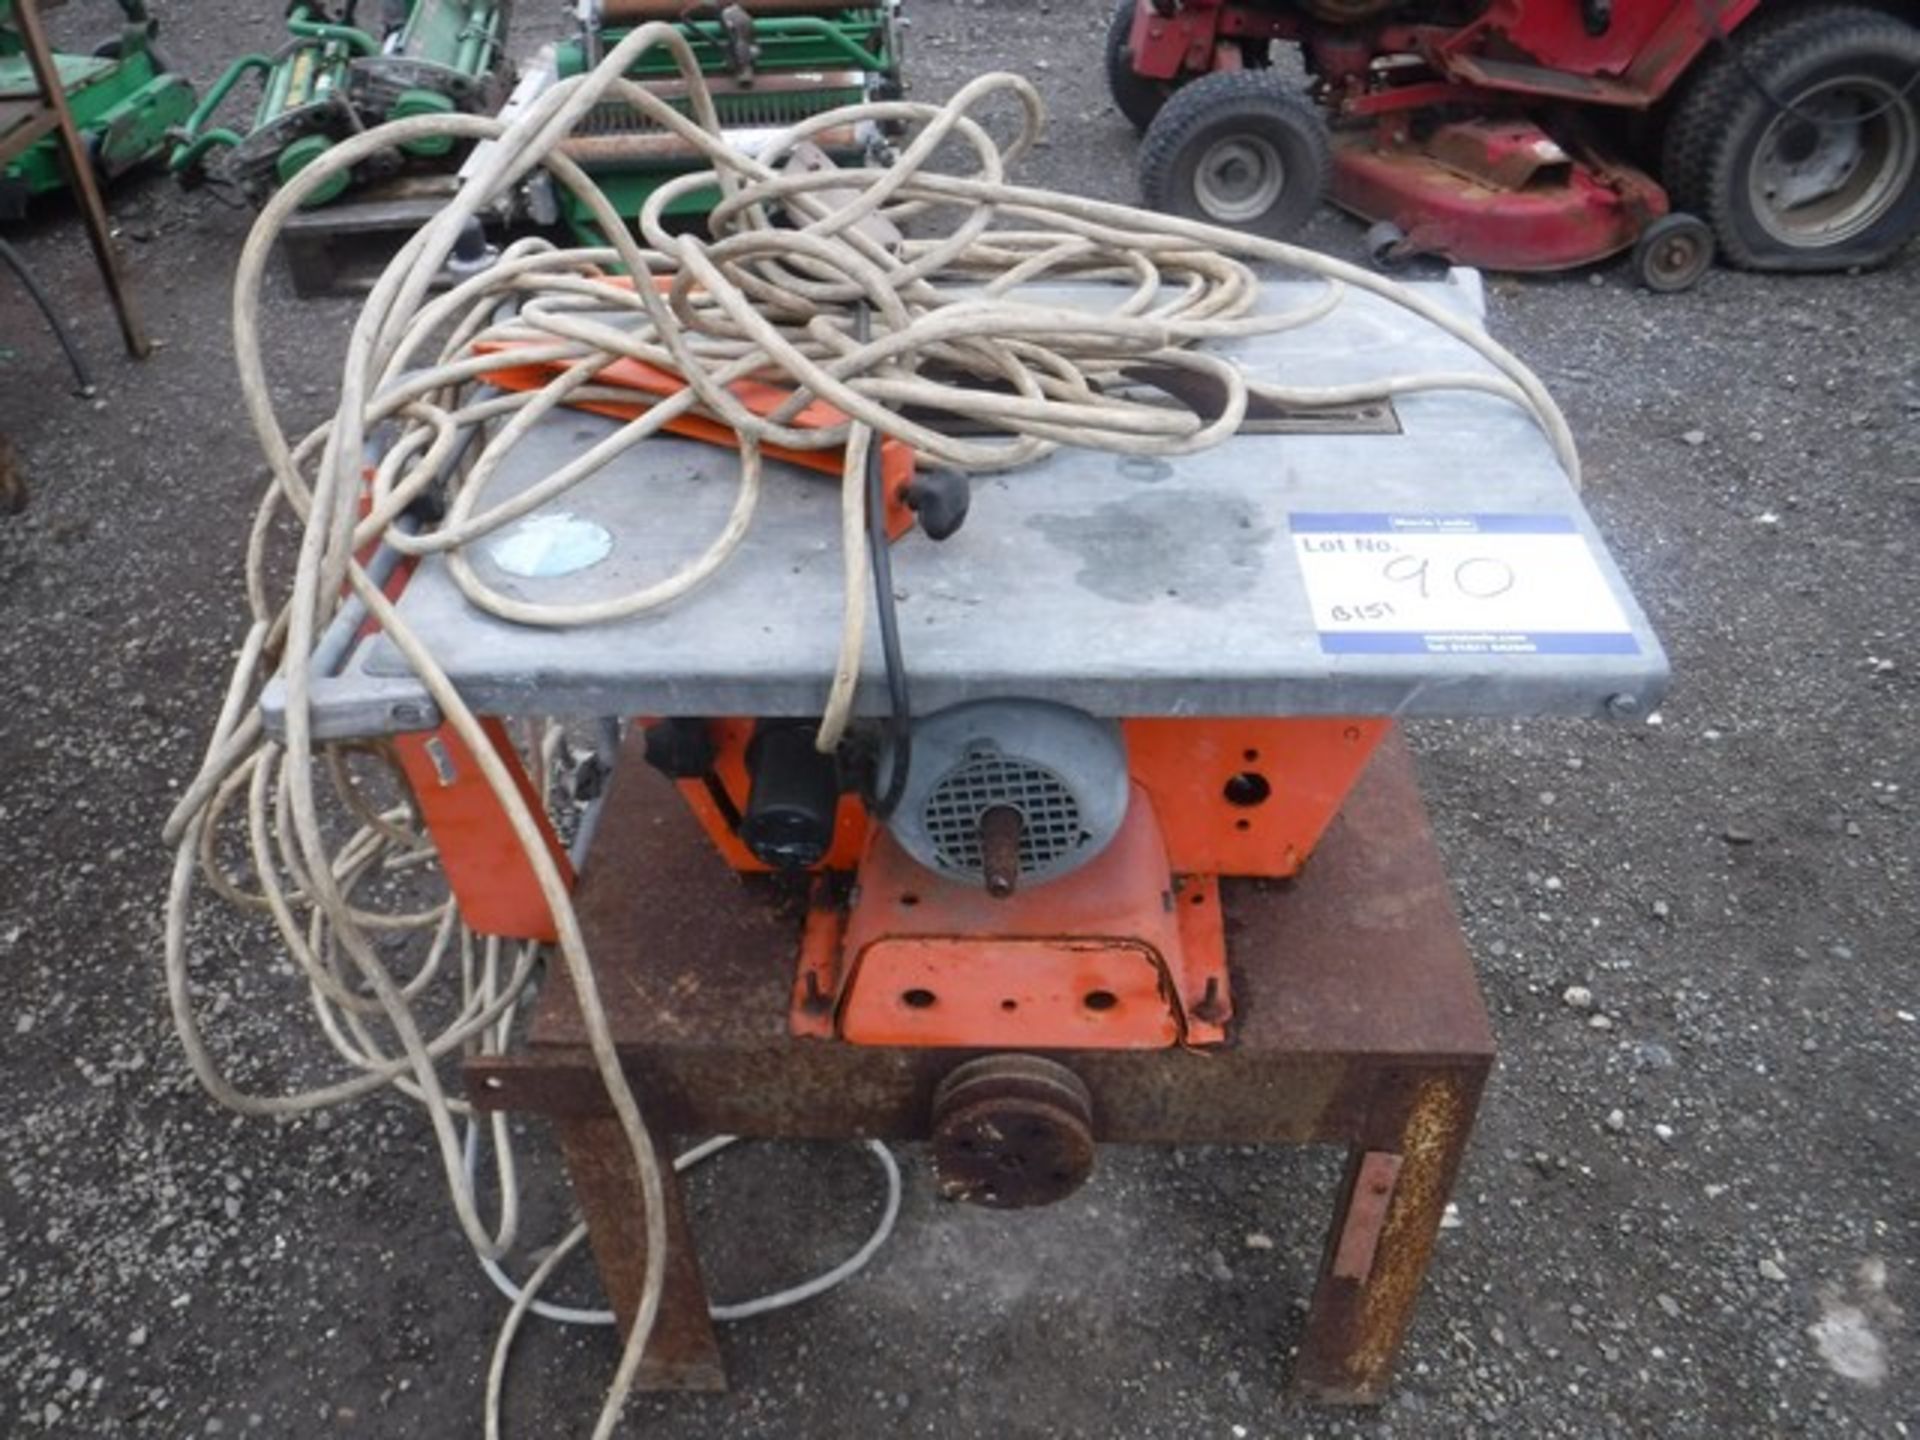 Circular bench saw, tyre fitting bench with vice & compressor hose